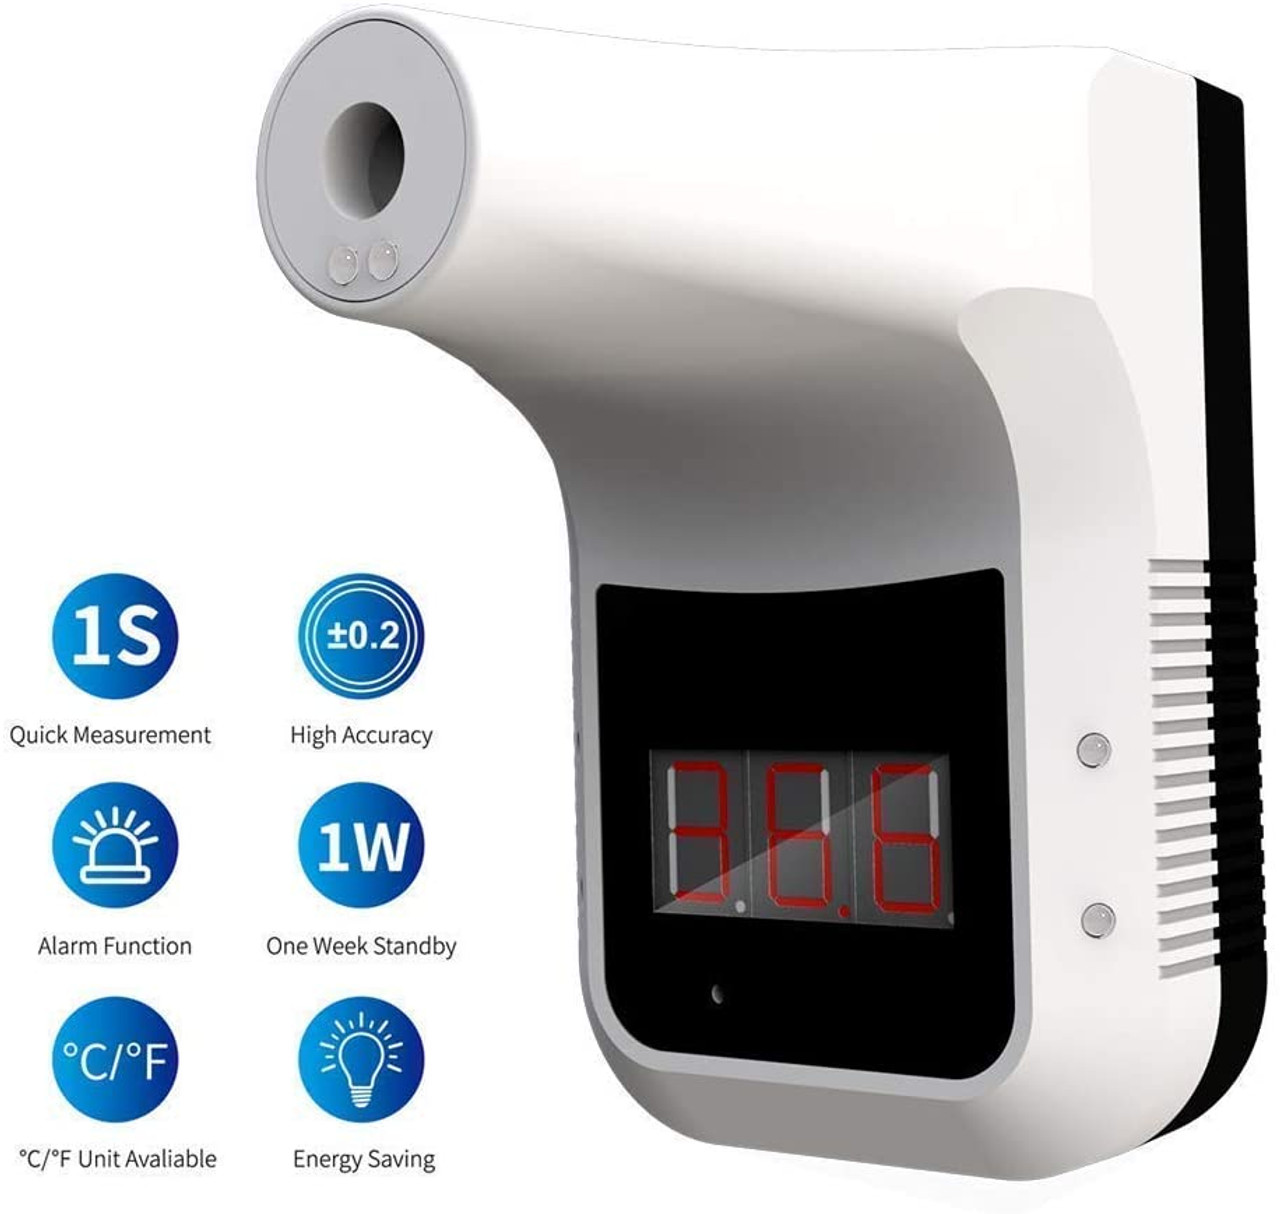 https://cdn11.bigcommerce.com/s-o23pa314c0/images/stencil/1280x1280/products/2544/4577/jaken_medical_wall_mounted_infrared_thermometer_1__28851.1594931050.jpg?c=2?imbypass=on